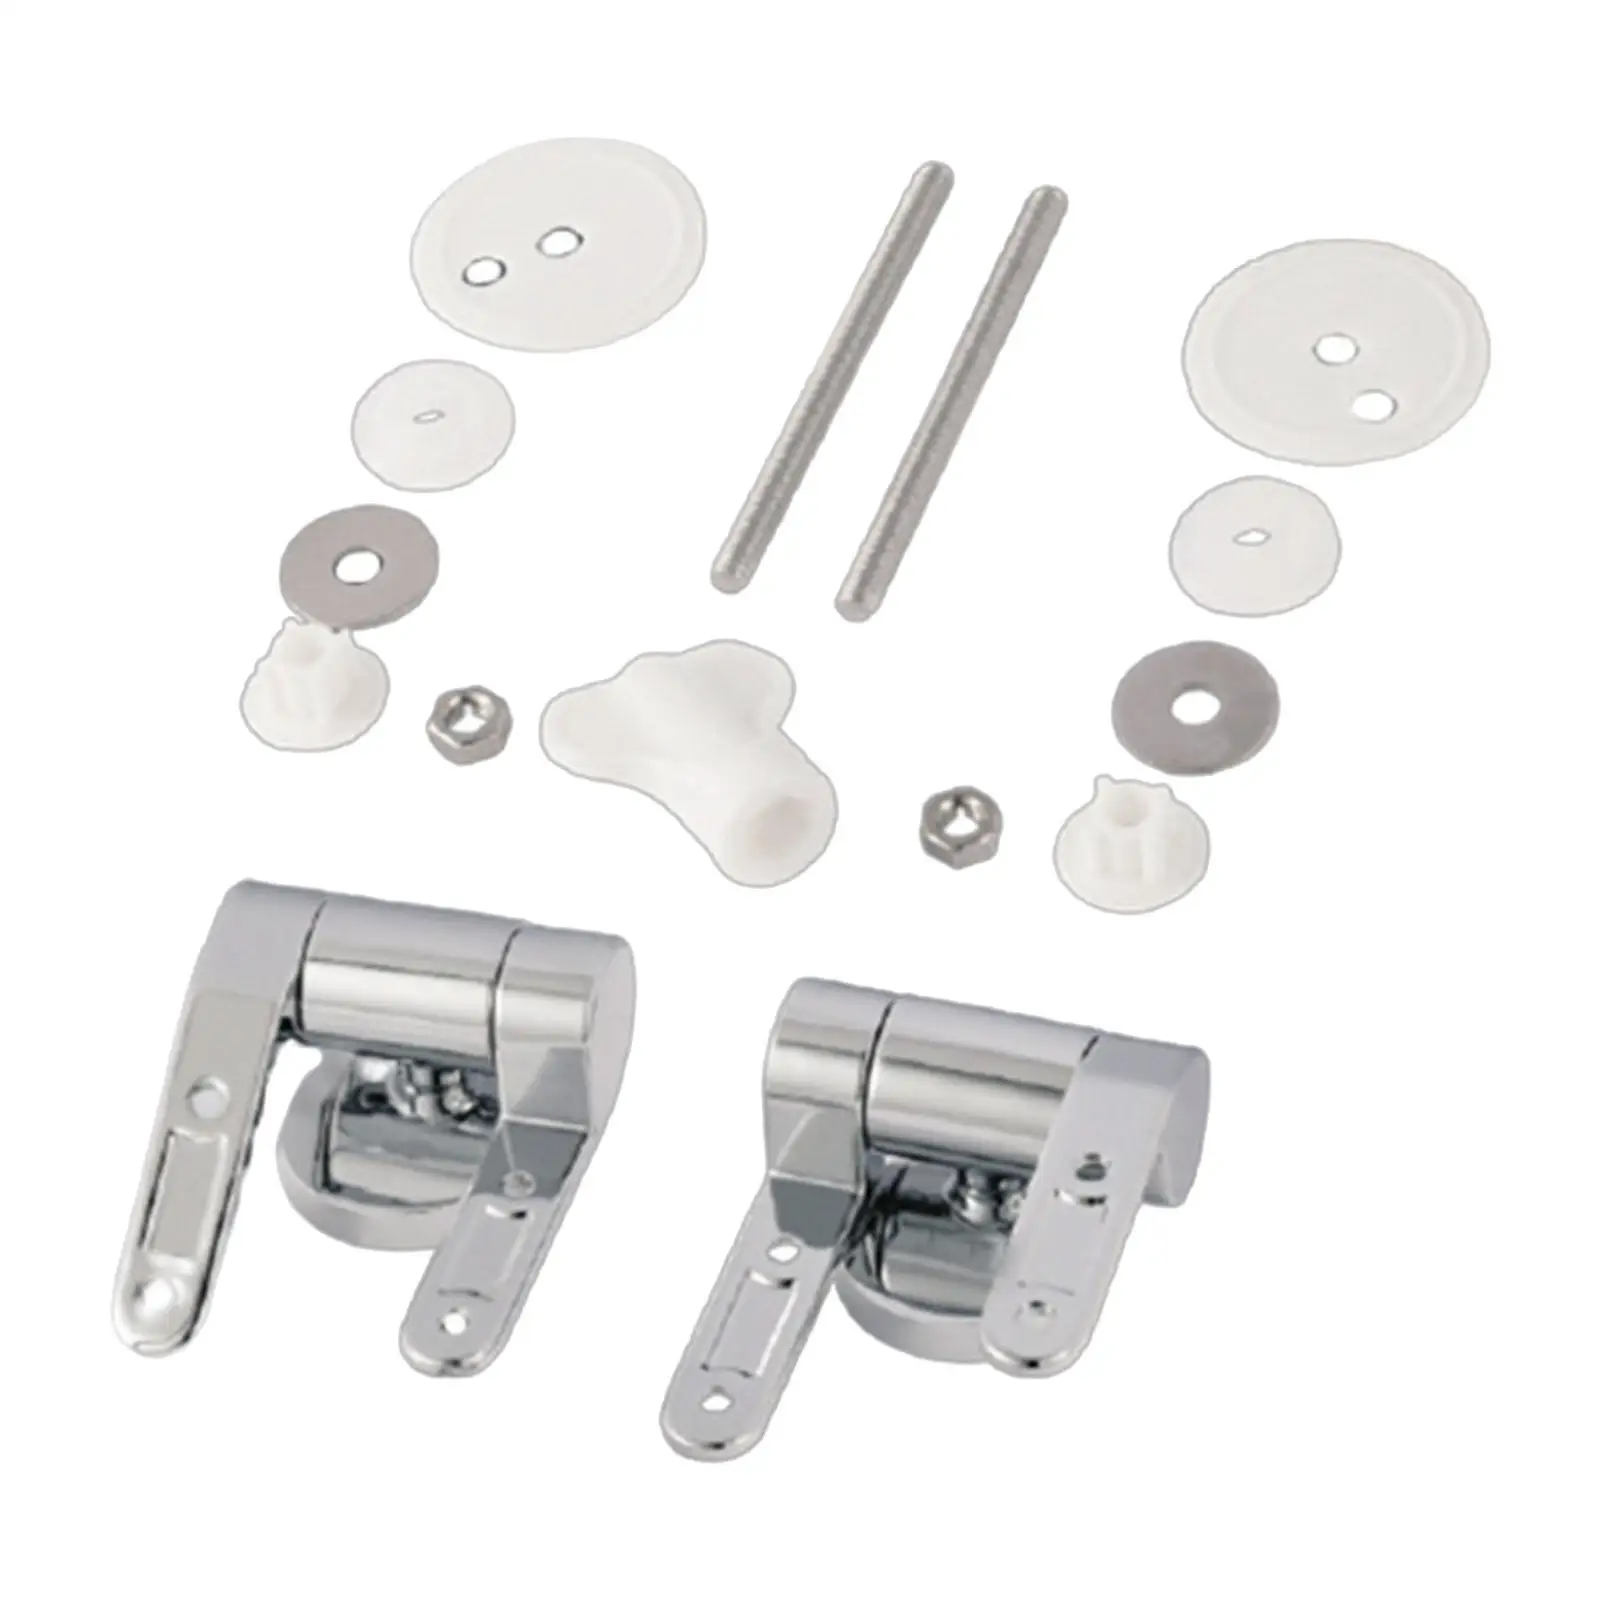 Toilet Seat Hinge Mountings Replacement Parts Zinc Alloy Mounting Fixed Joint for Kitchen Flipping Sliding Bath Rice Cooker Lids